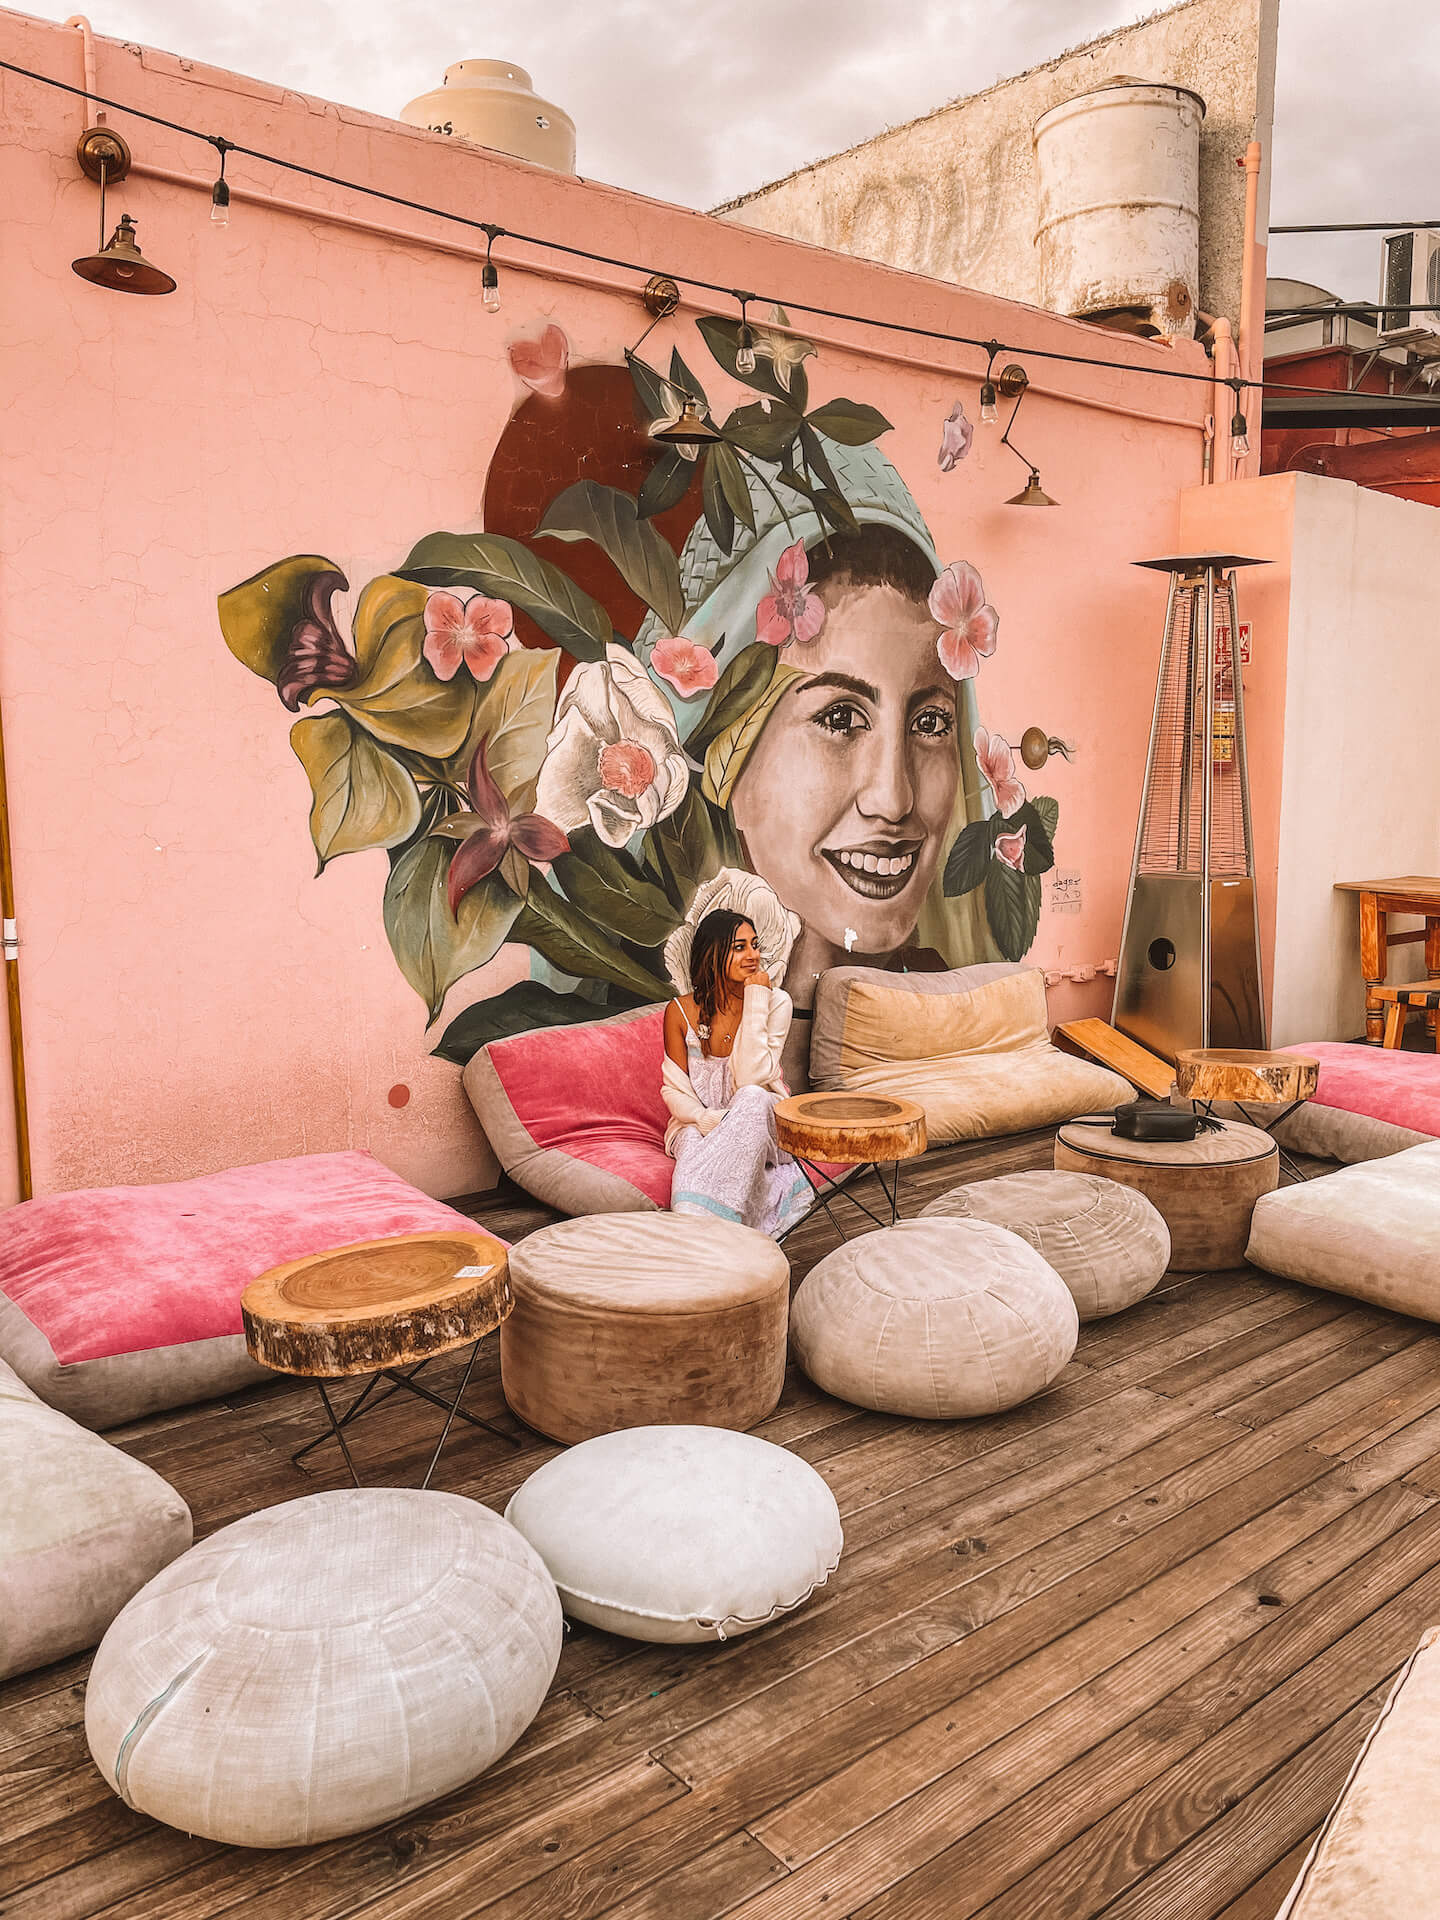 Nabila Ismail sits amidst a plush outdoor patio with a bright mural on the pink wall behind her